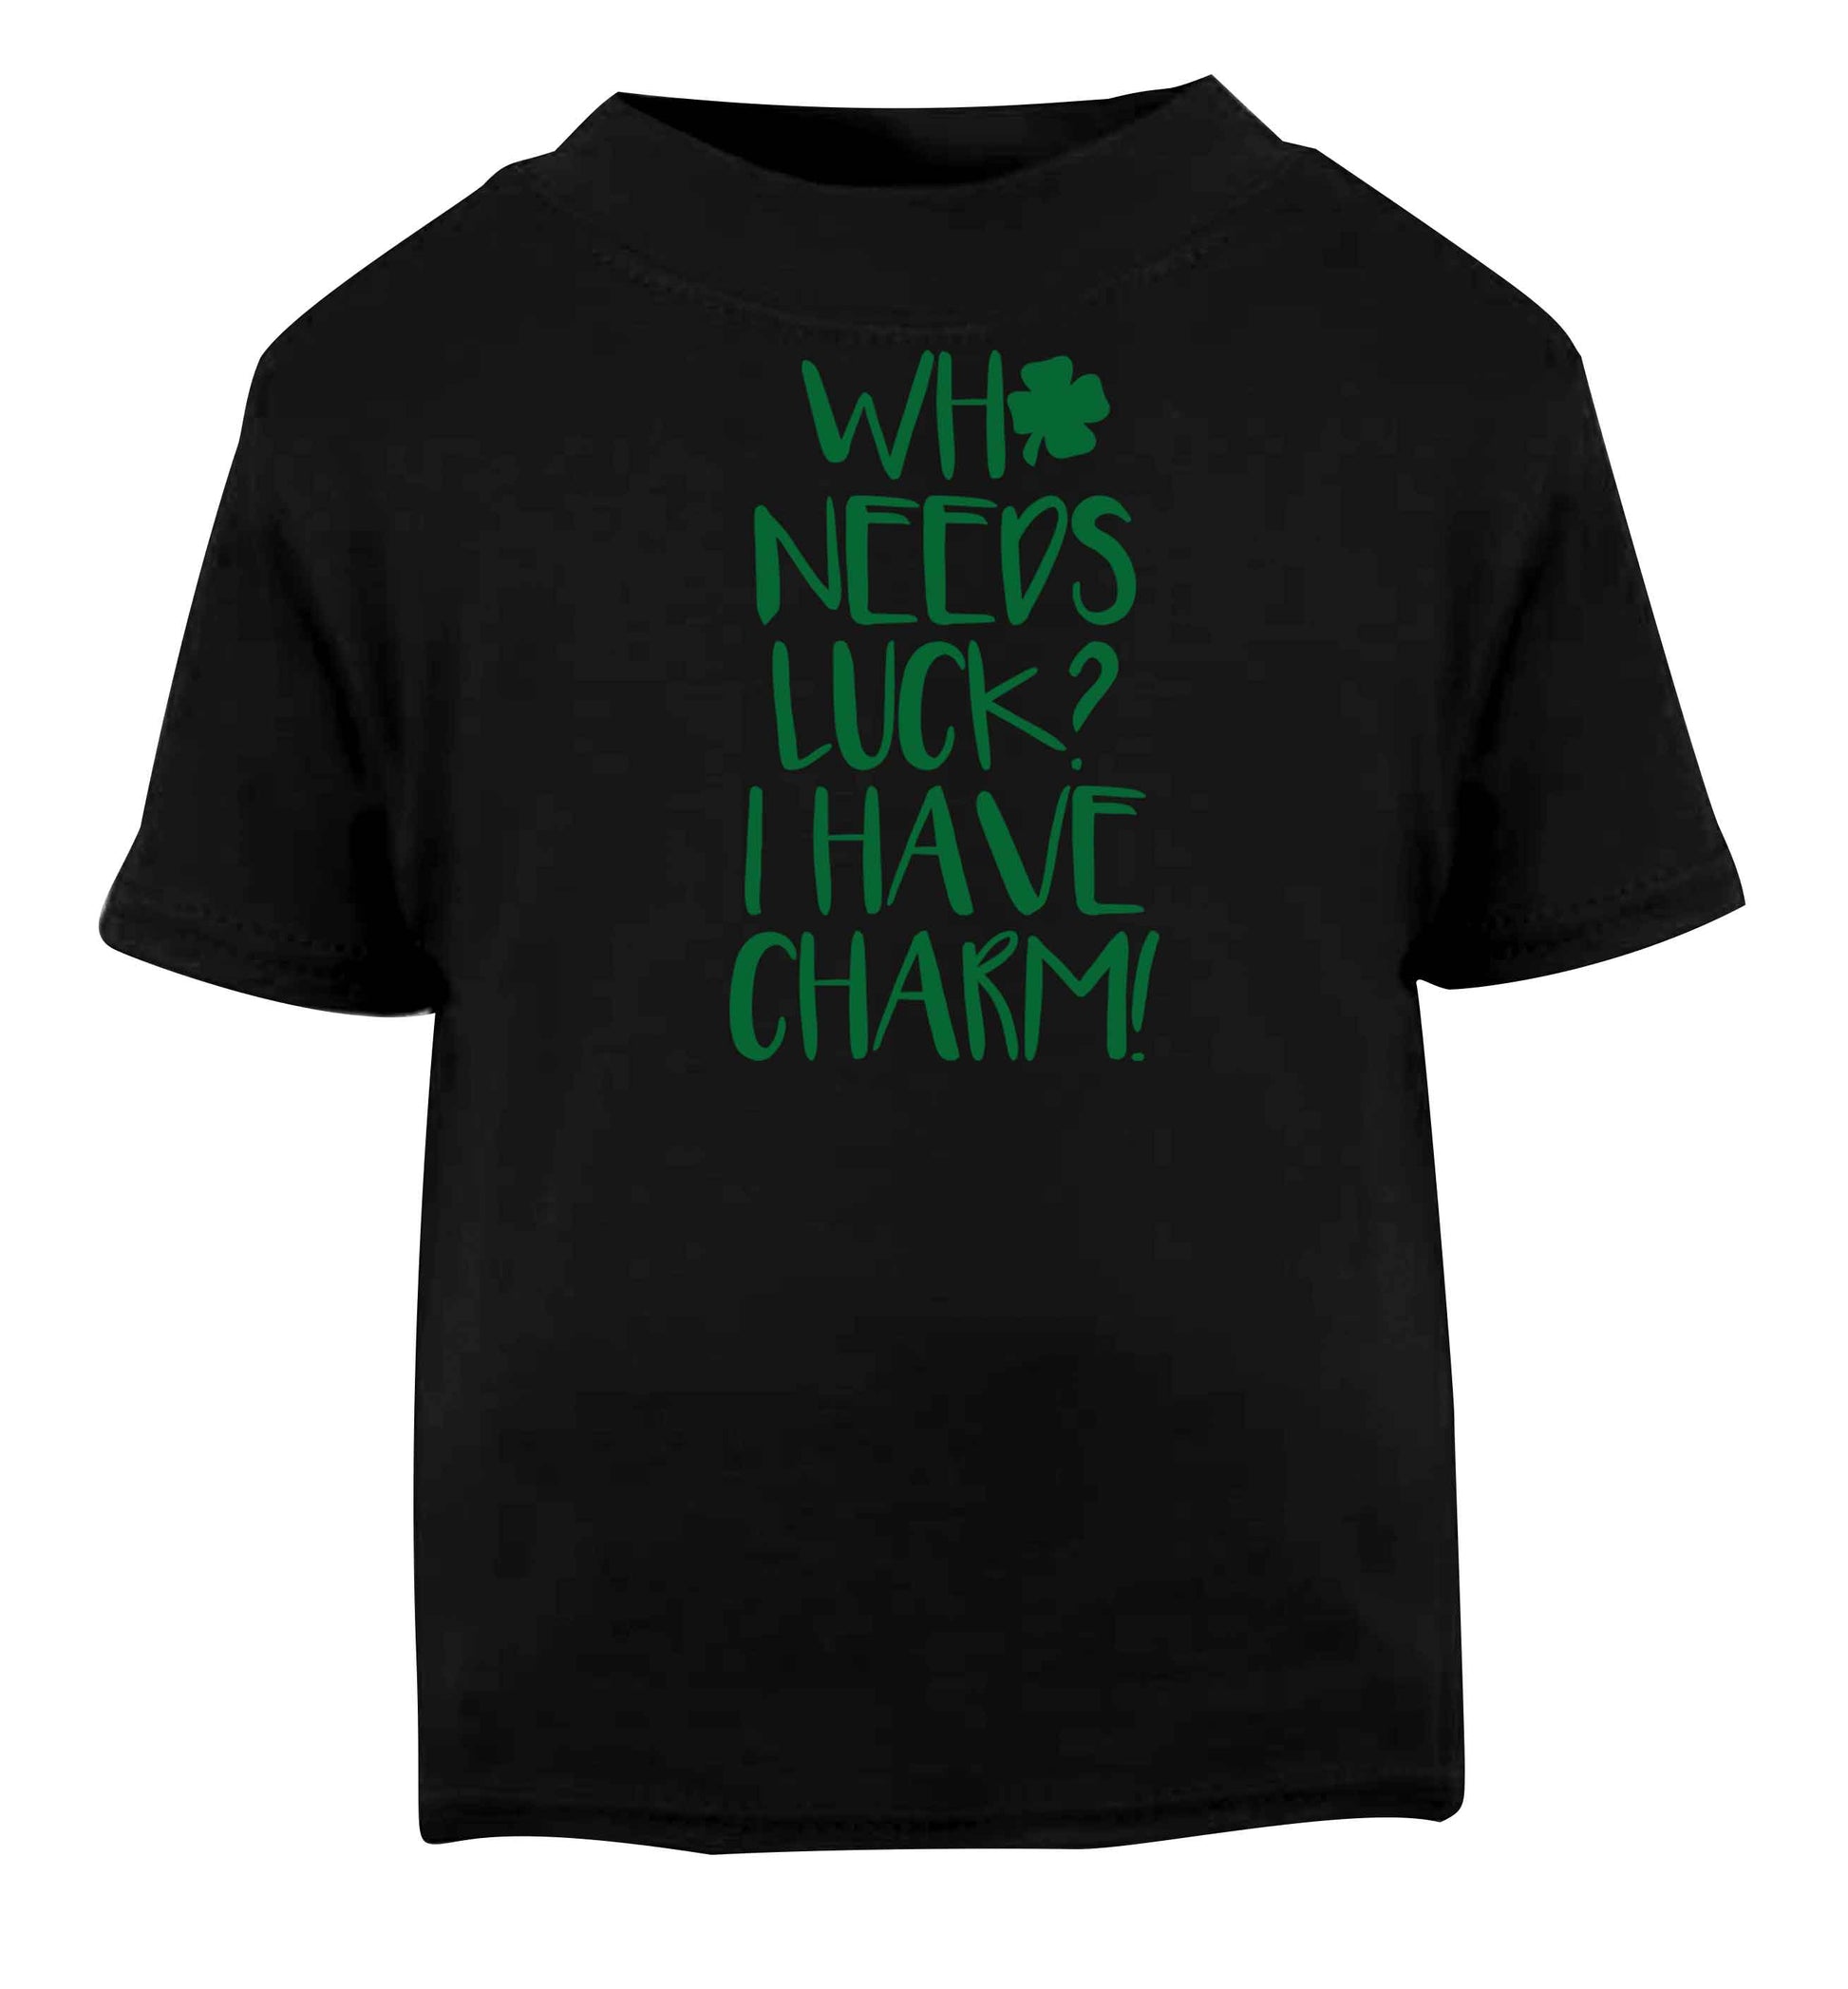 Who needs luck? I have charm! Black baby toddler Tshirt 2 years